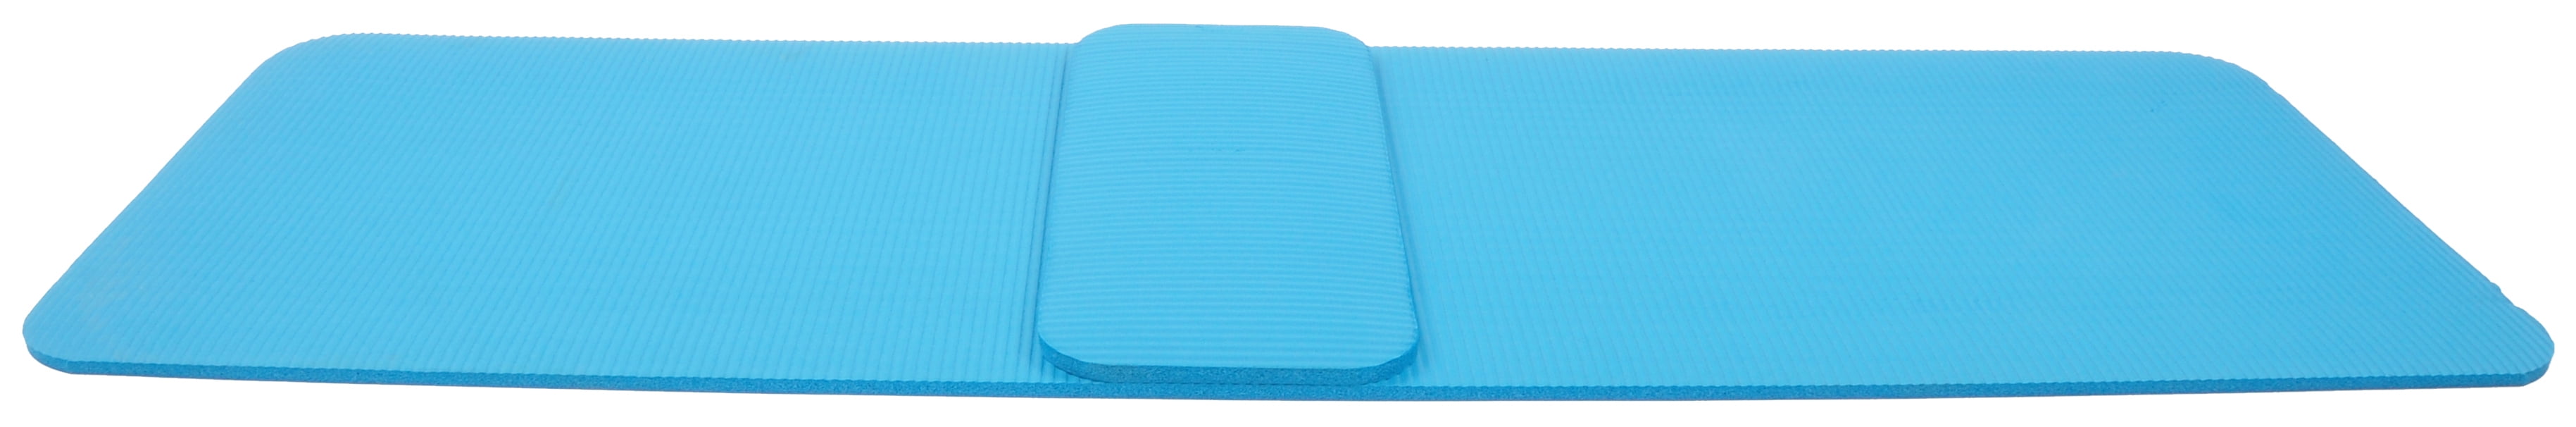 BalanceFrom GoYoga All-Purpose 1/2-Inch Extra Thick High Density Anti-Tear  Exercise Yoga Mat and Knee Pad with Carrying Strap